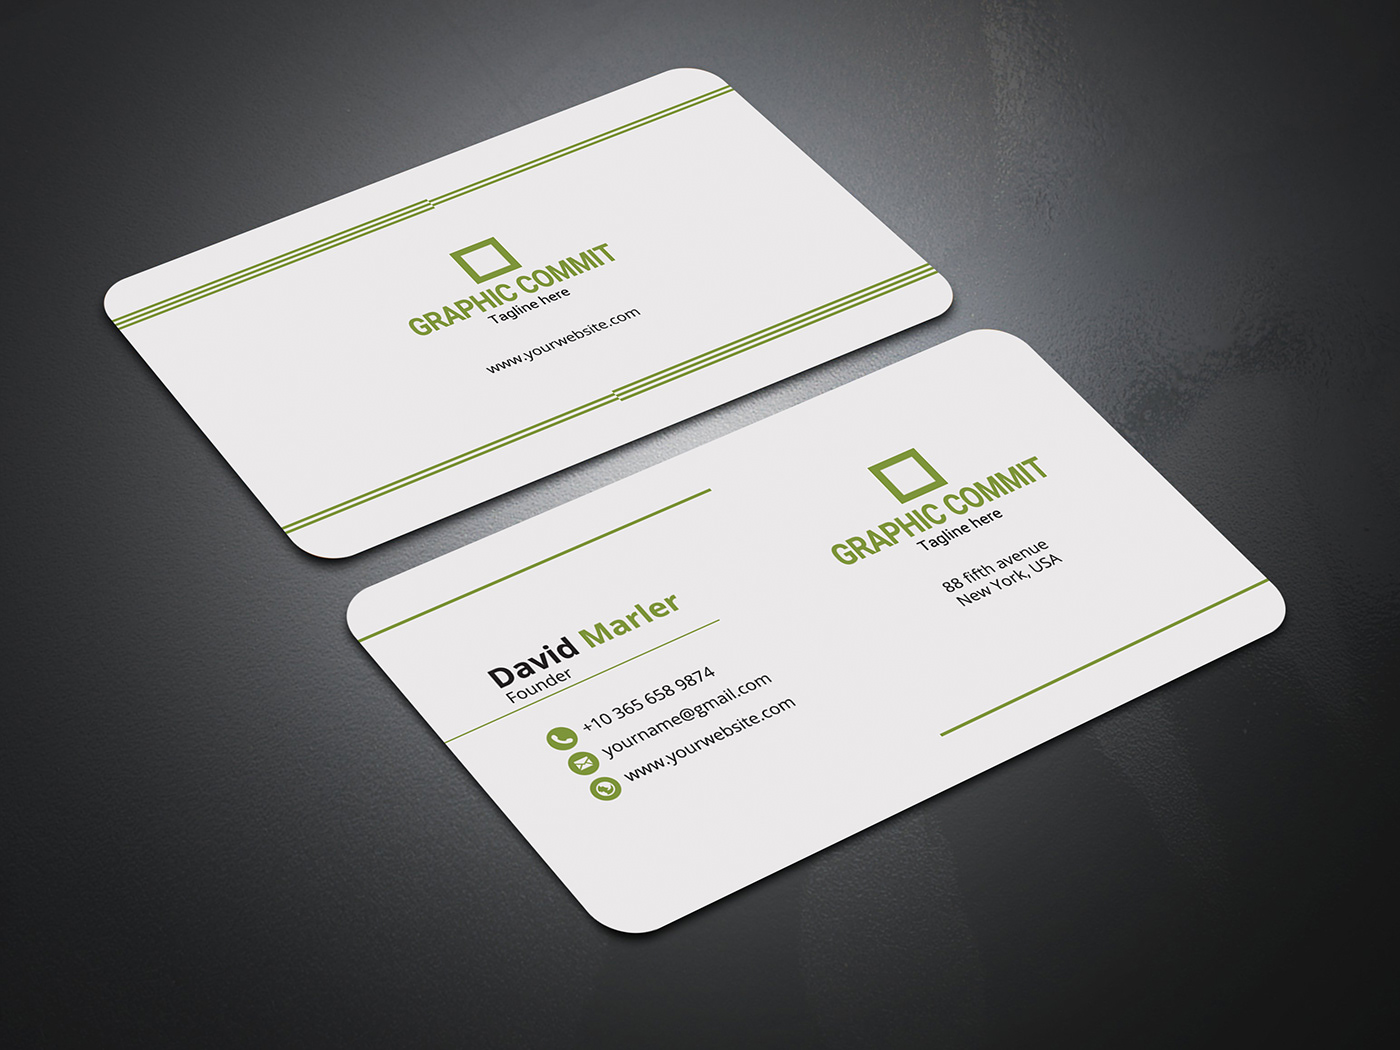 Brand Design business card Business card design business card design idea business card designer business card designing Business Card Designs Business Cards Corporate Identity visiting card design